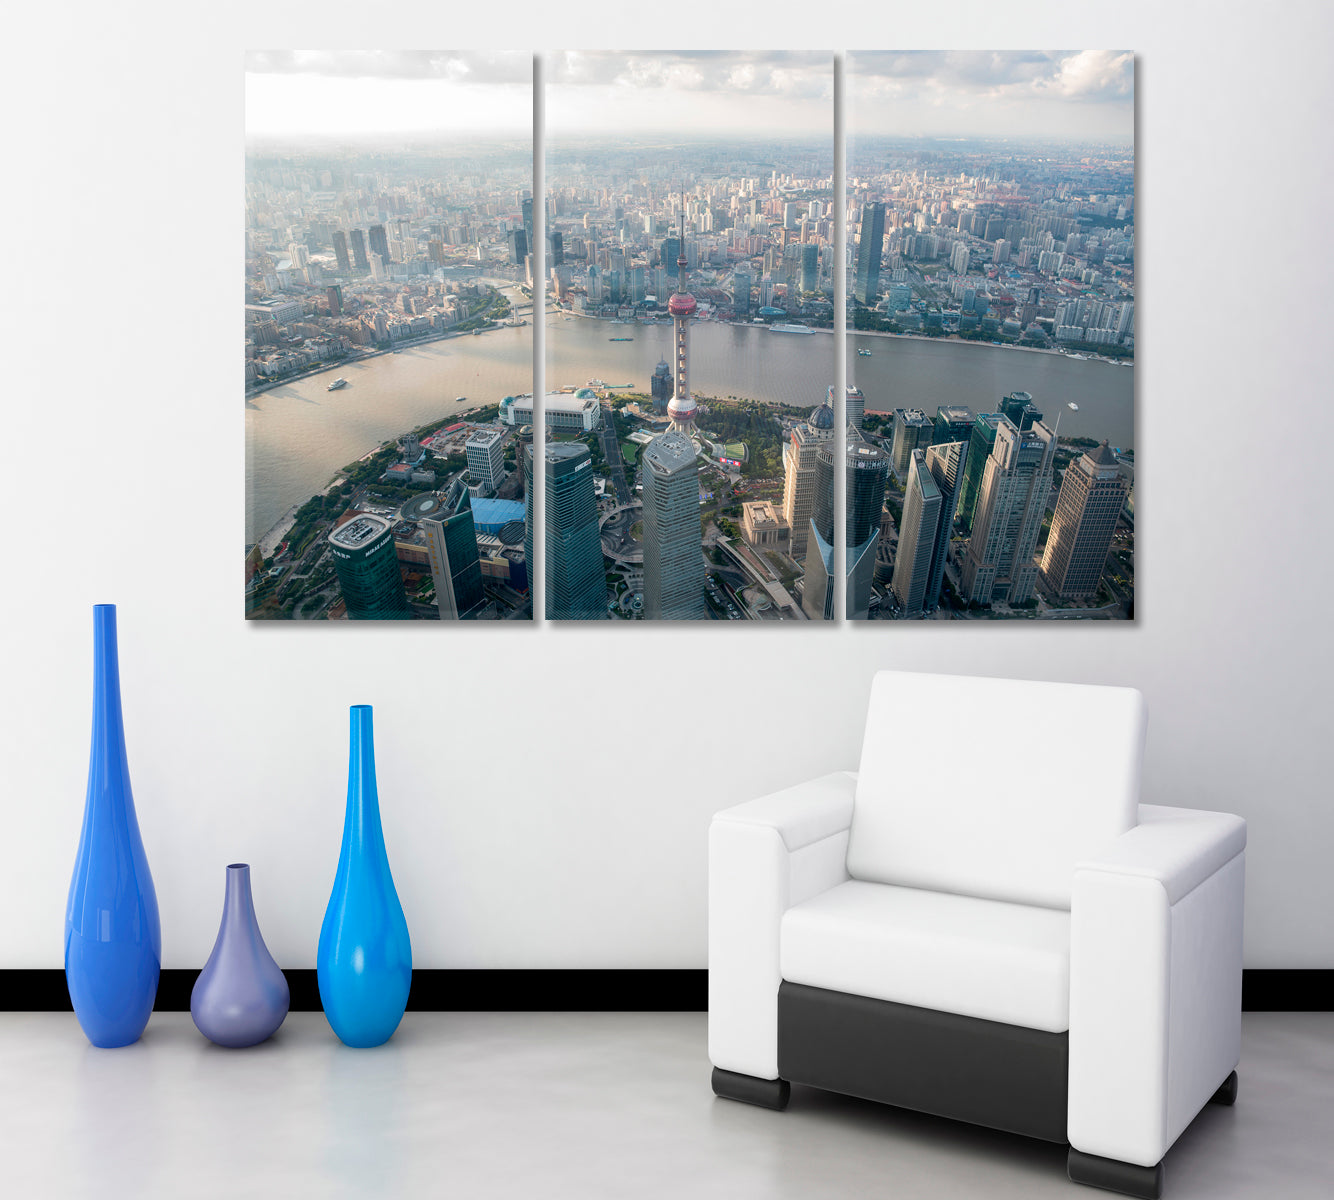 Shanghai Cityscape Skyscrapers Poster Cities Wall Art Artesty 3 panels 36" x 24" 